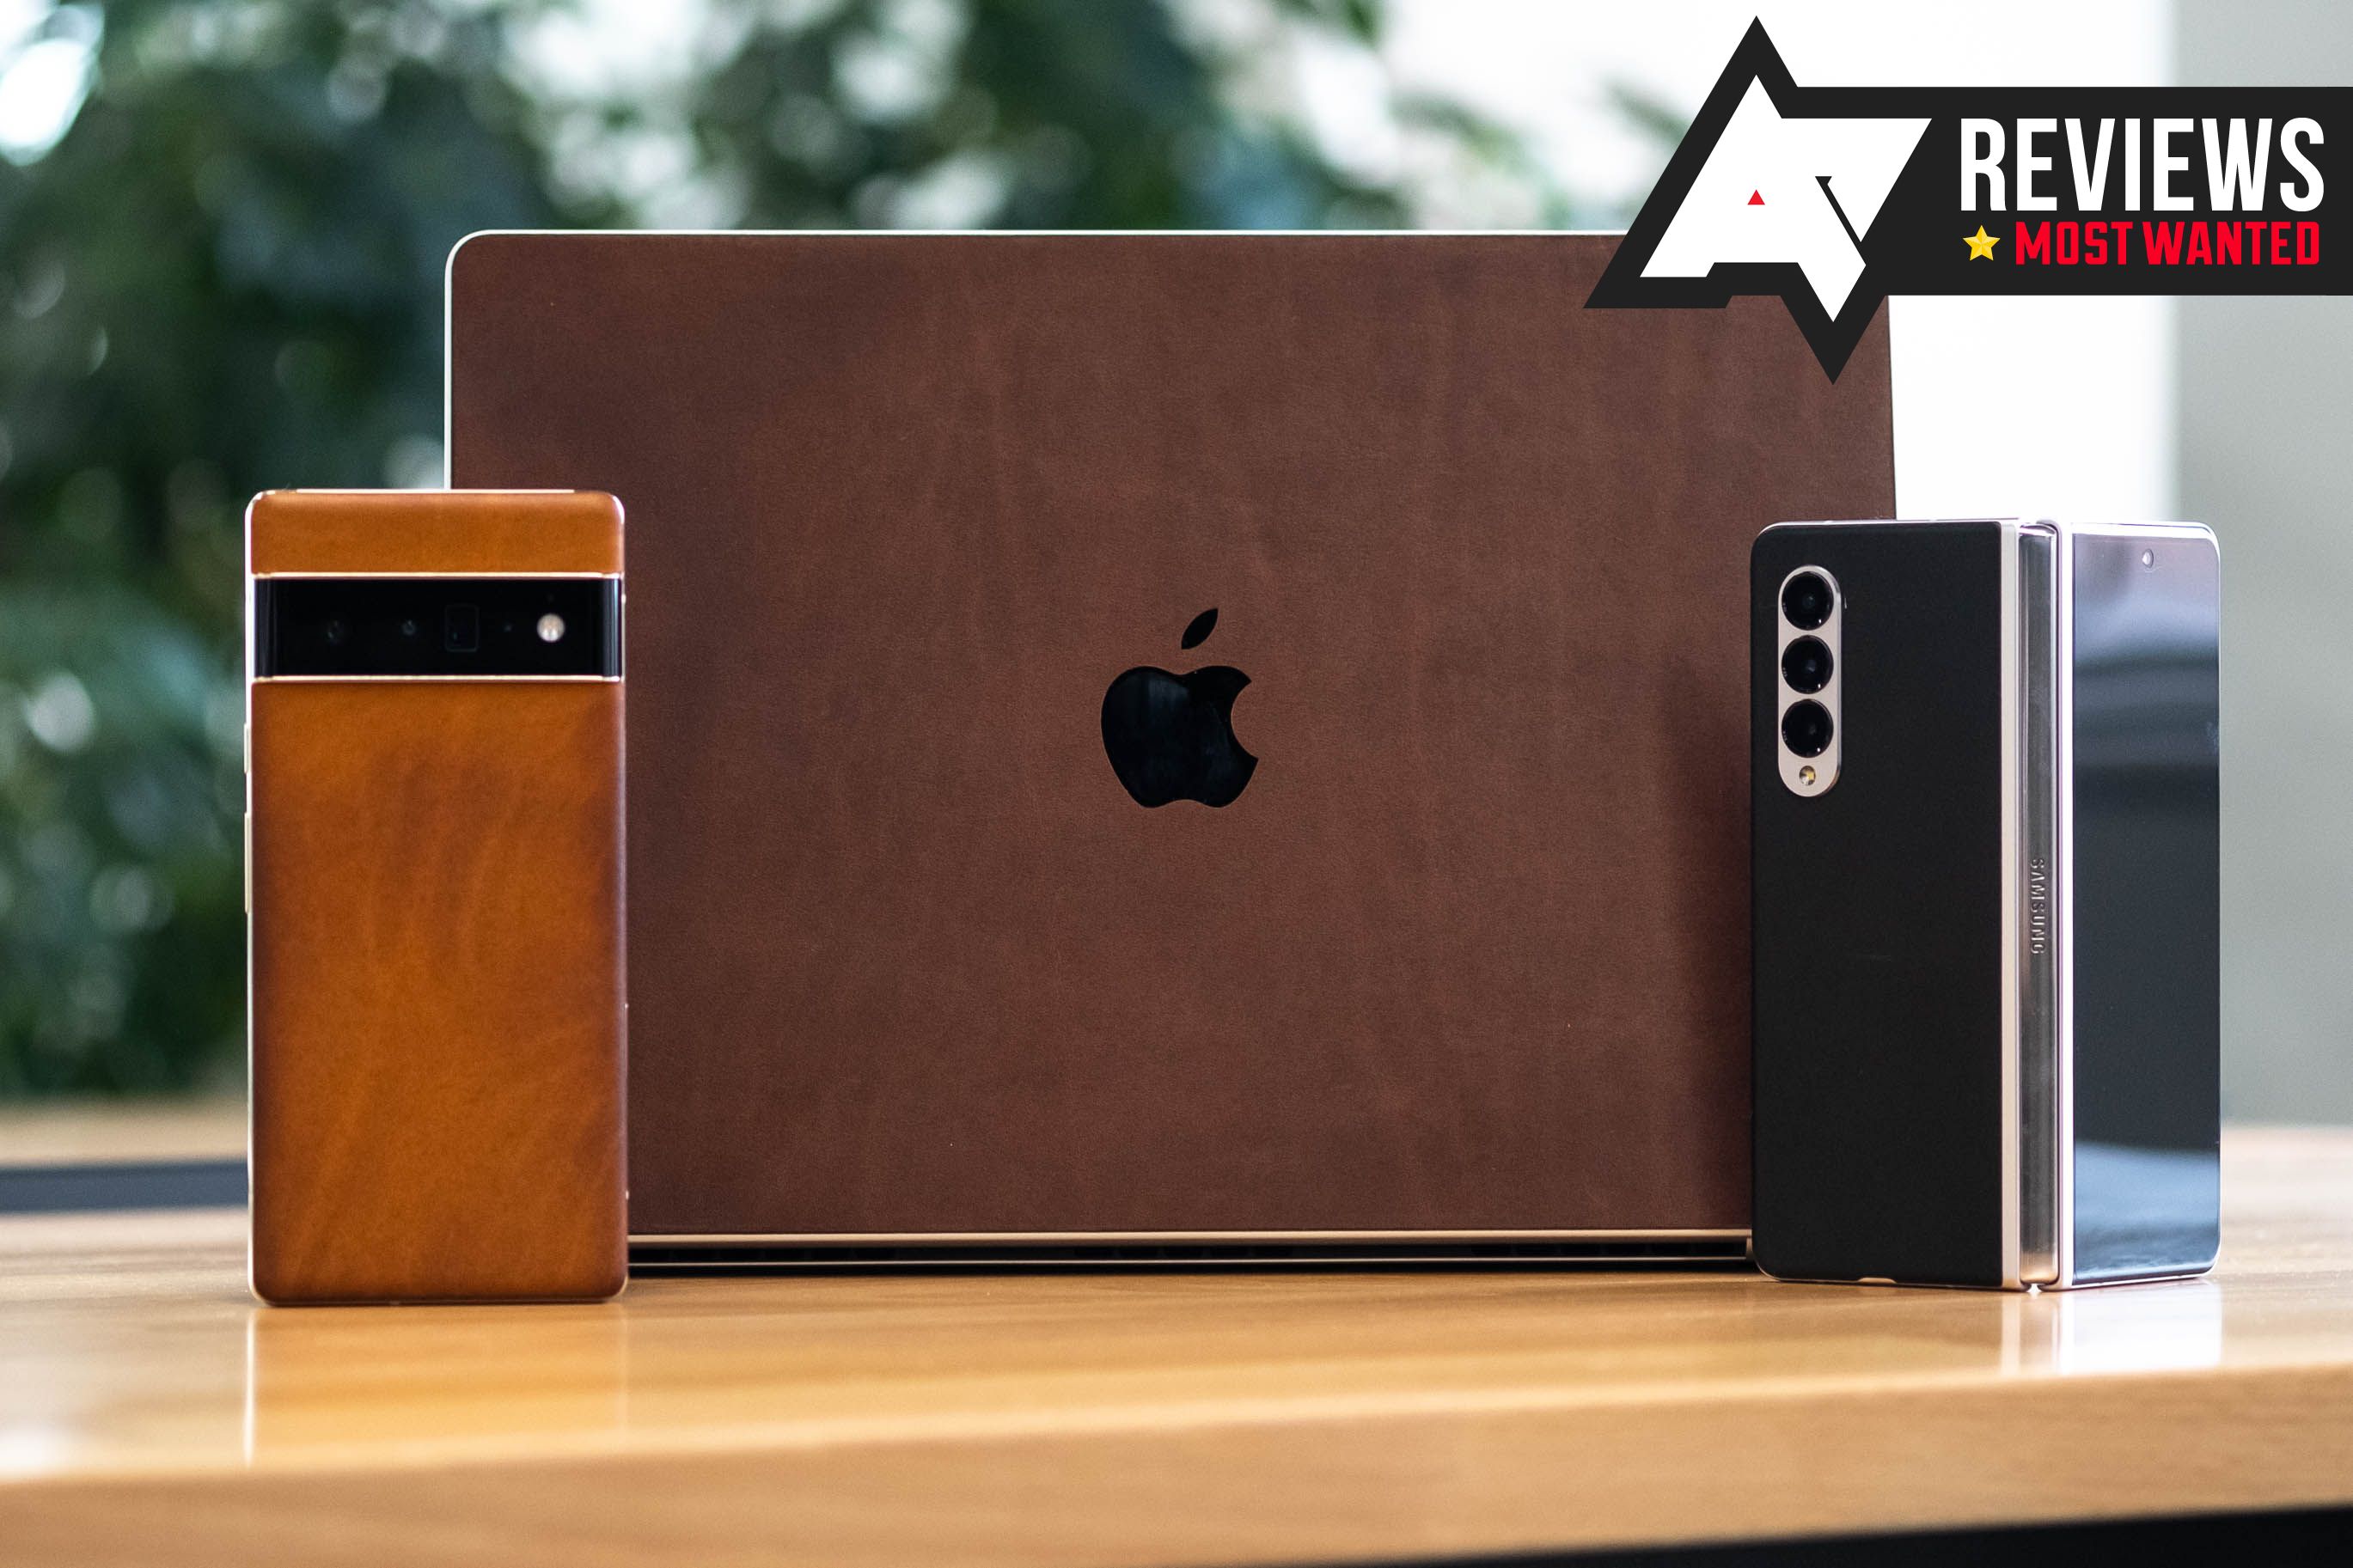 These dbrand limited-edition real leather skins for Surface Pro